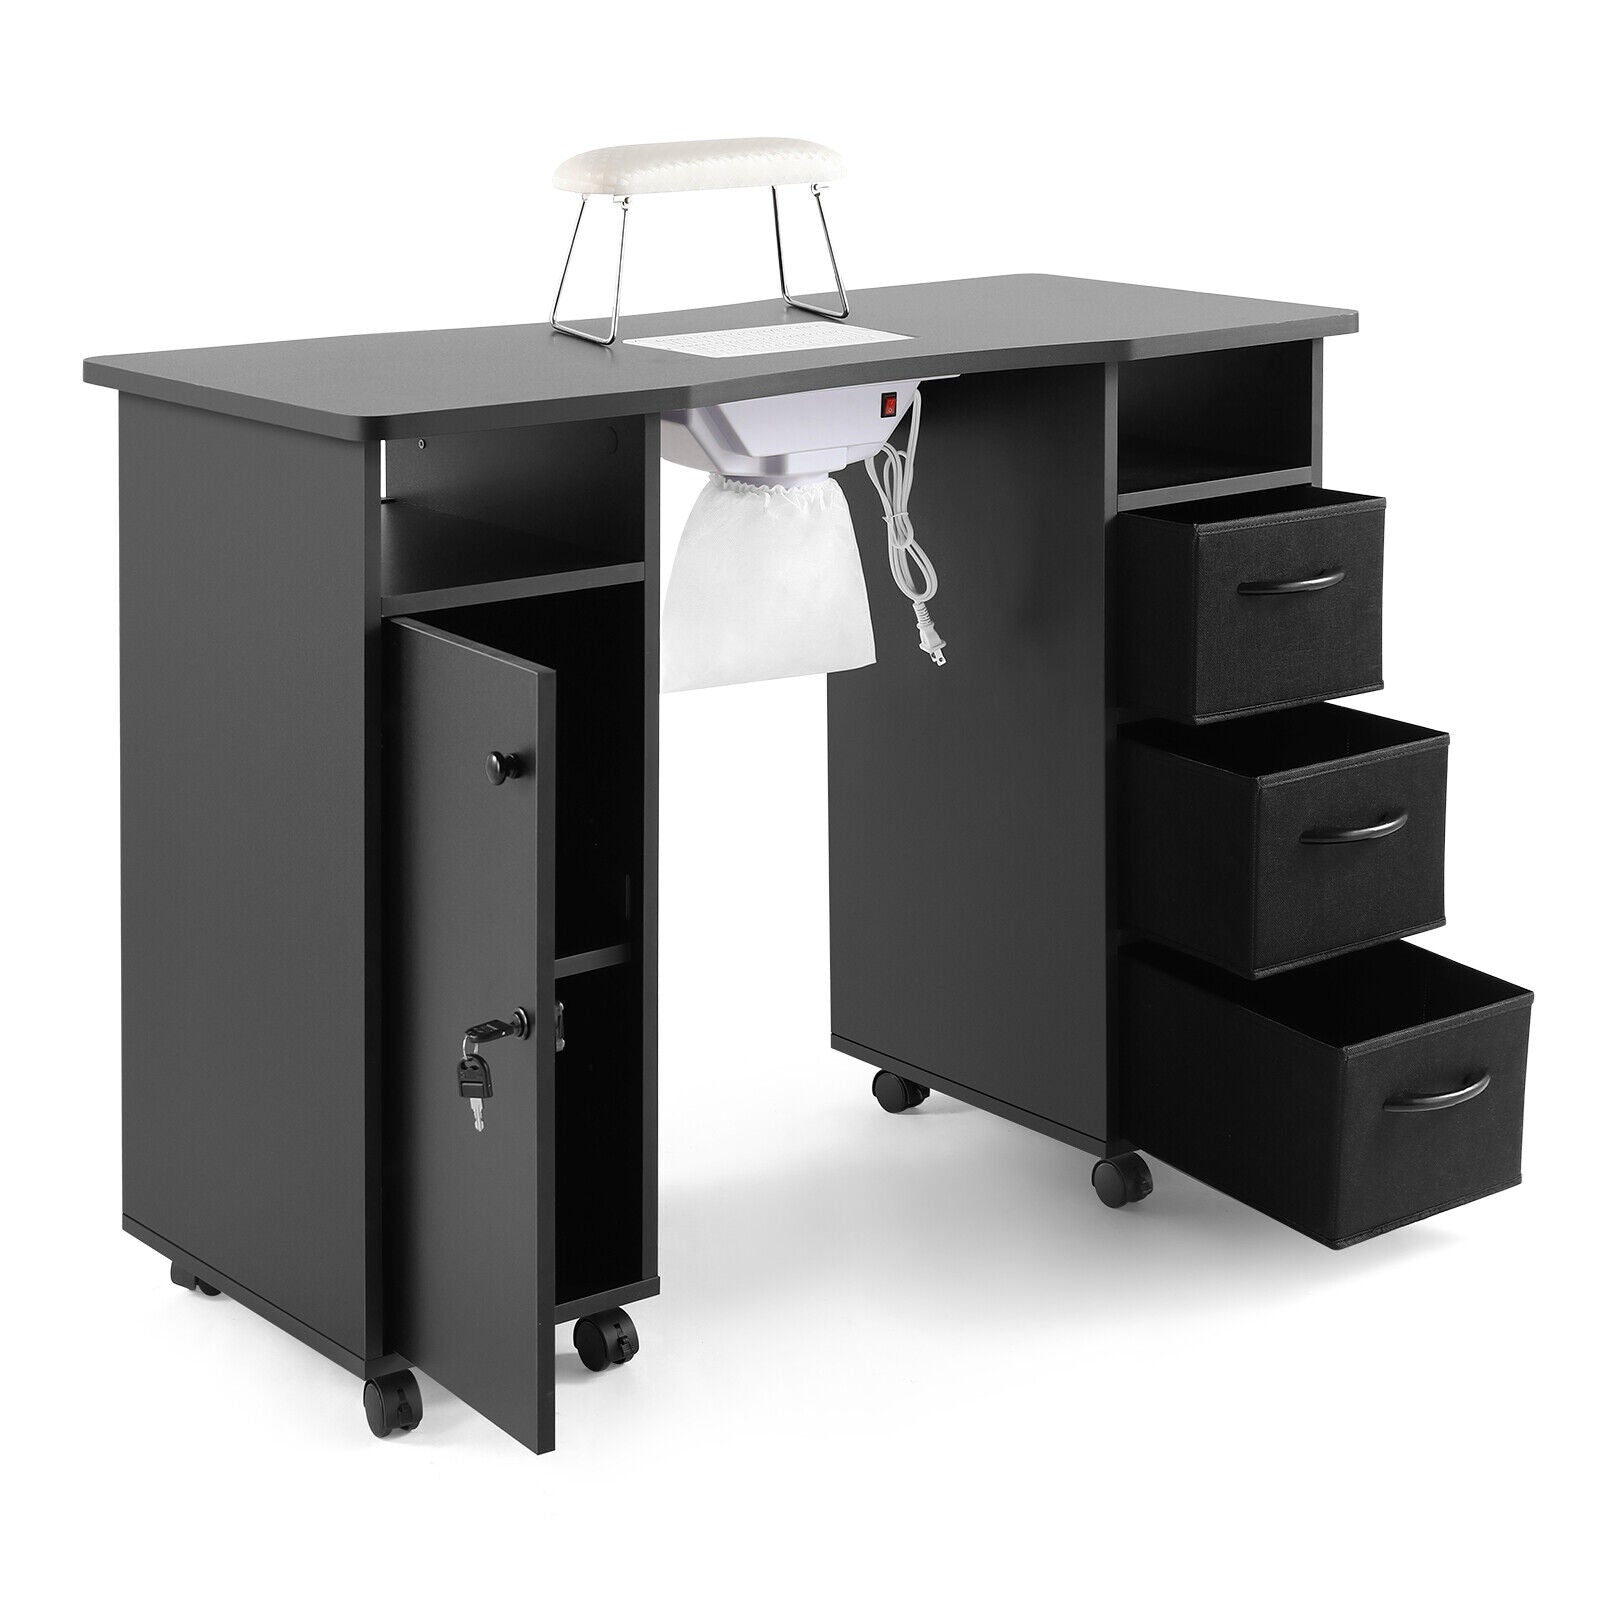 #7011 Manicure Table, Nail Tech Table Station with Electric Downdraft Vent, Wrist Cushion, Lockable Wheels, Storage Drawers, Wooden Handle